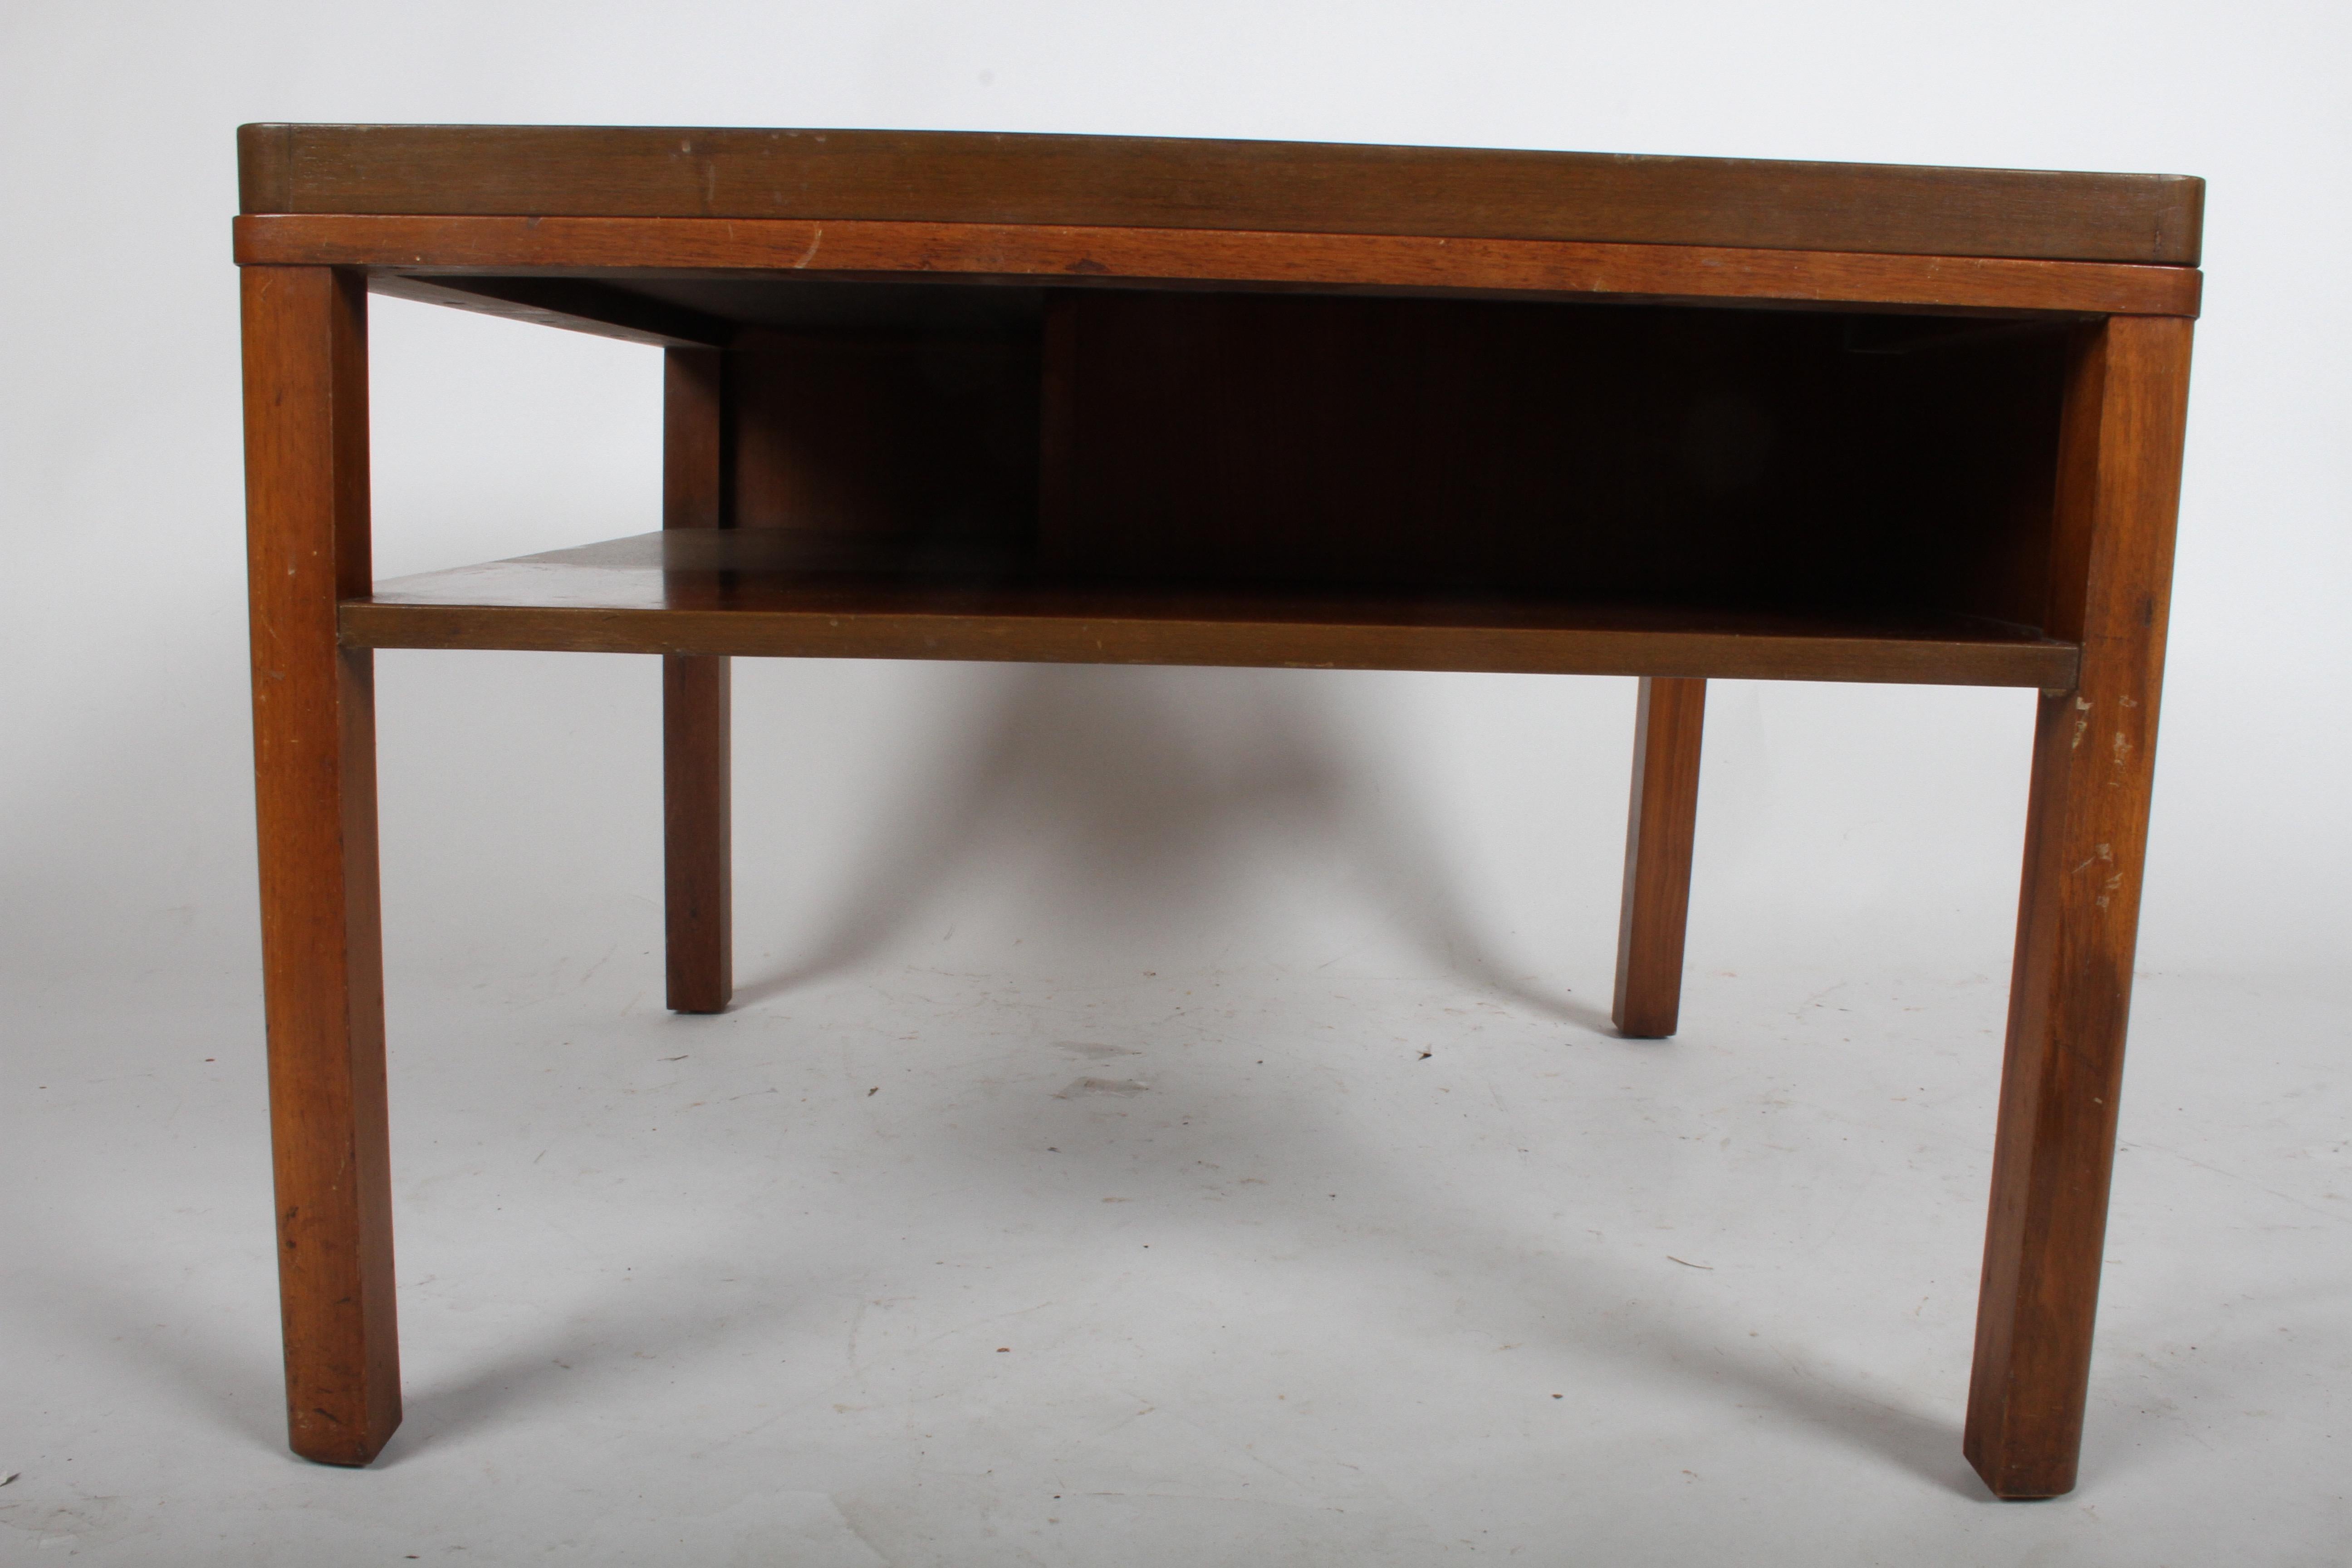 1940s Edward J. Wormley for Dunbar Mid-Century Mahogany Bookshelf End Table In Good Condition For Sale In St. Louis, MO